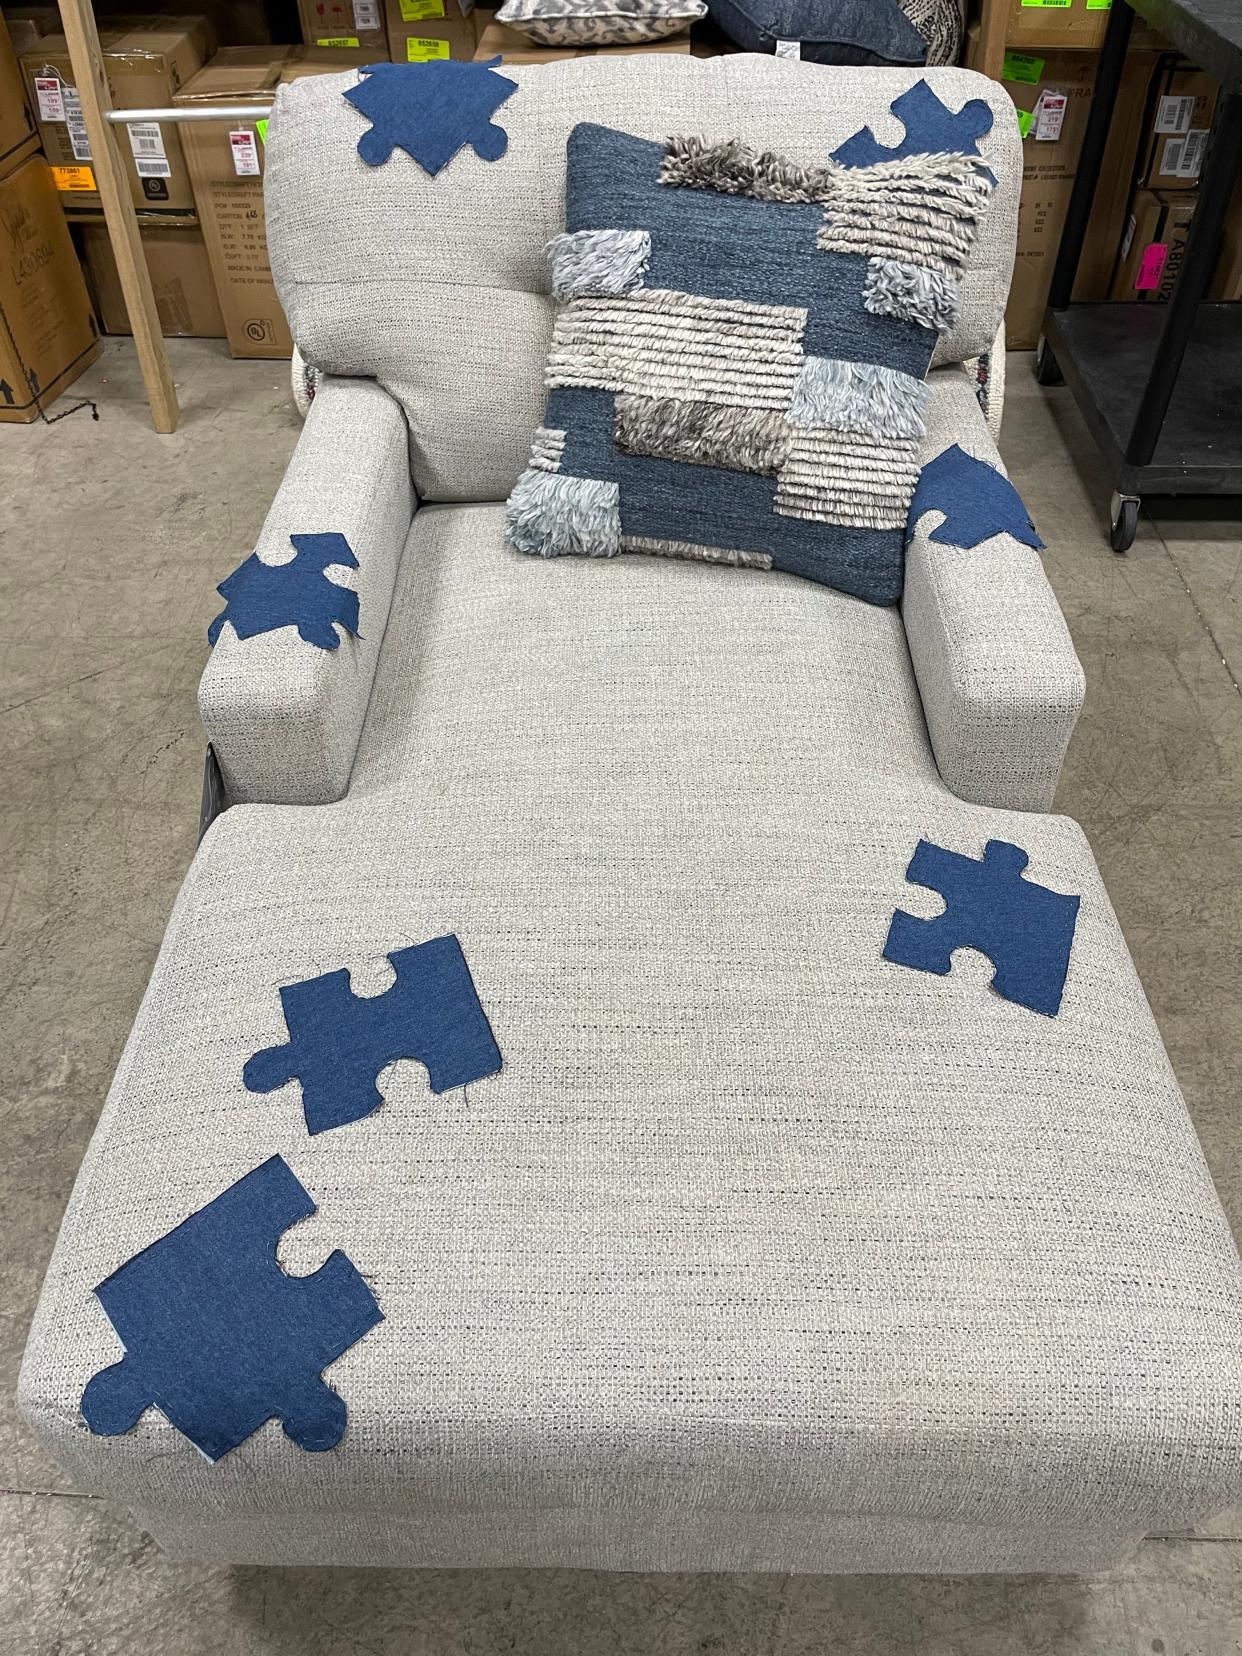 Chaise lounge with handsewn puzzle piece patches donated by Coconis Furniture for the Eastside Community Ministry CHAIR-ity auction.